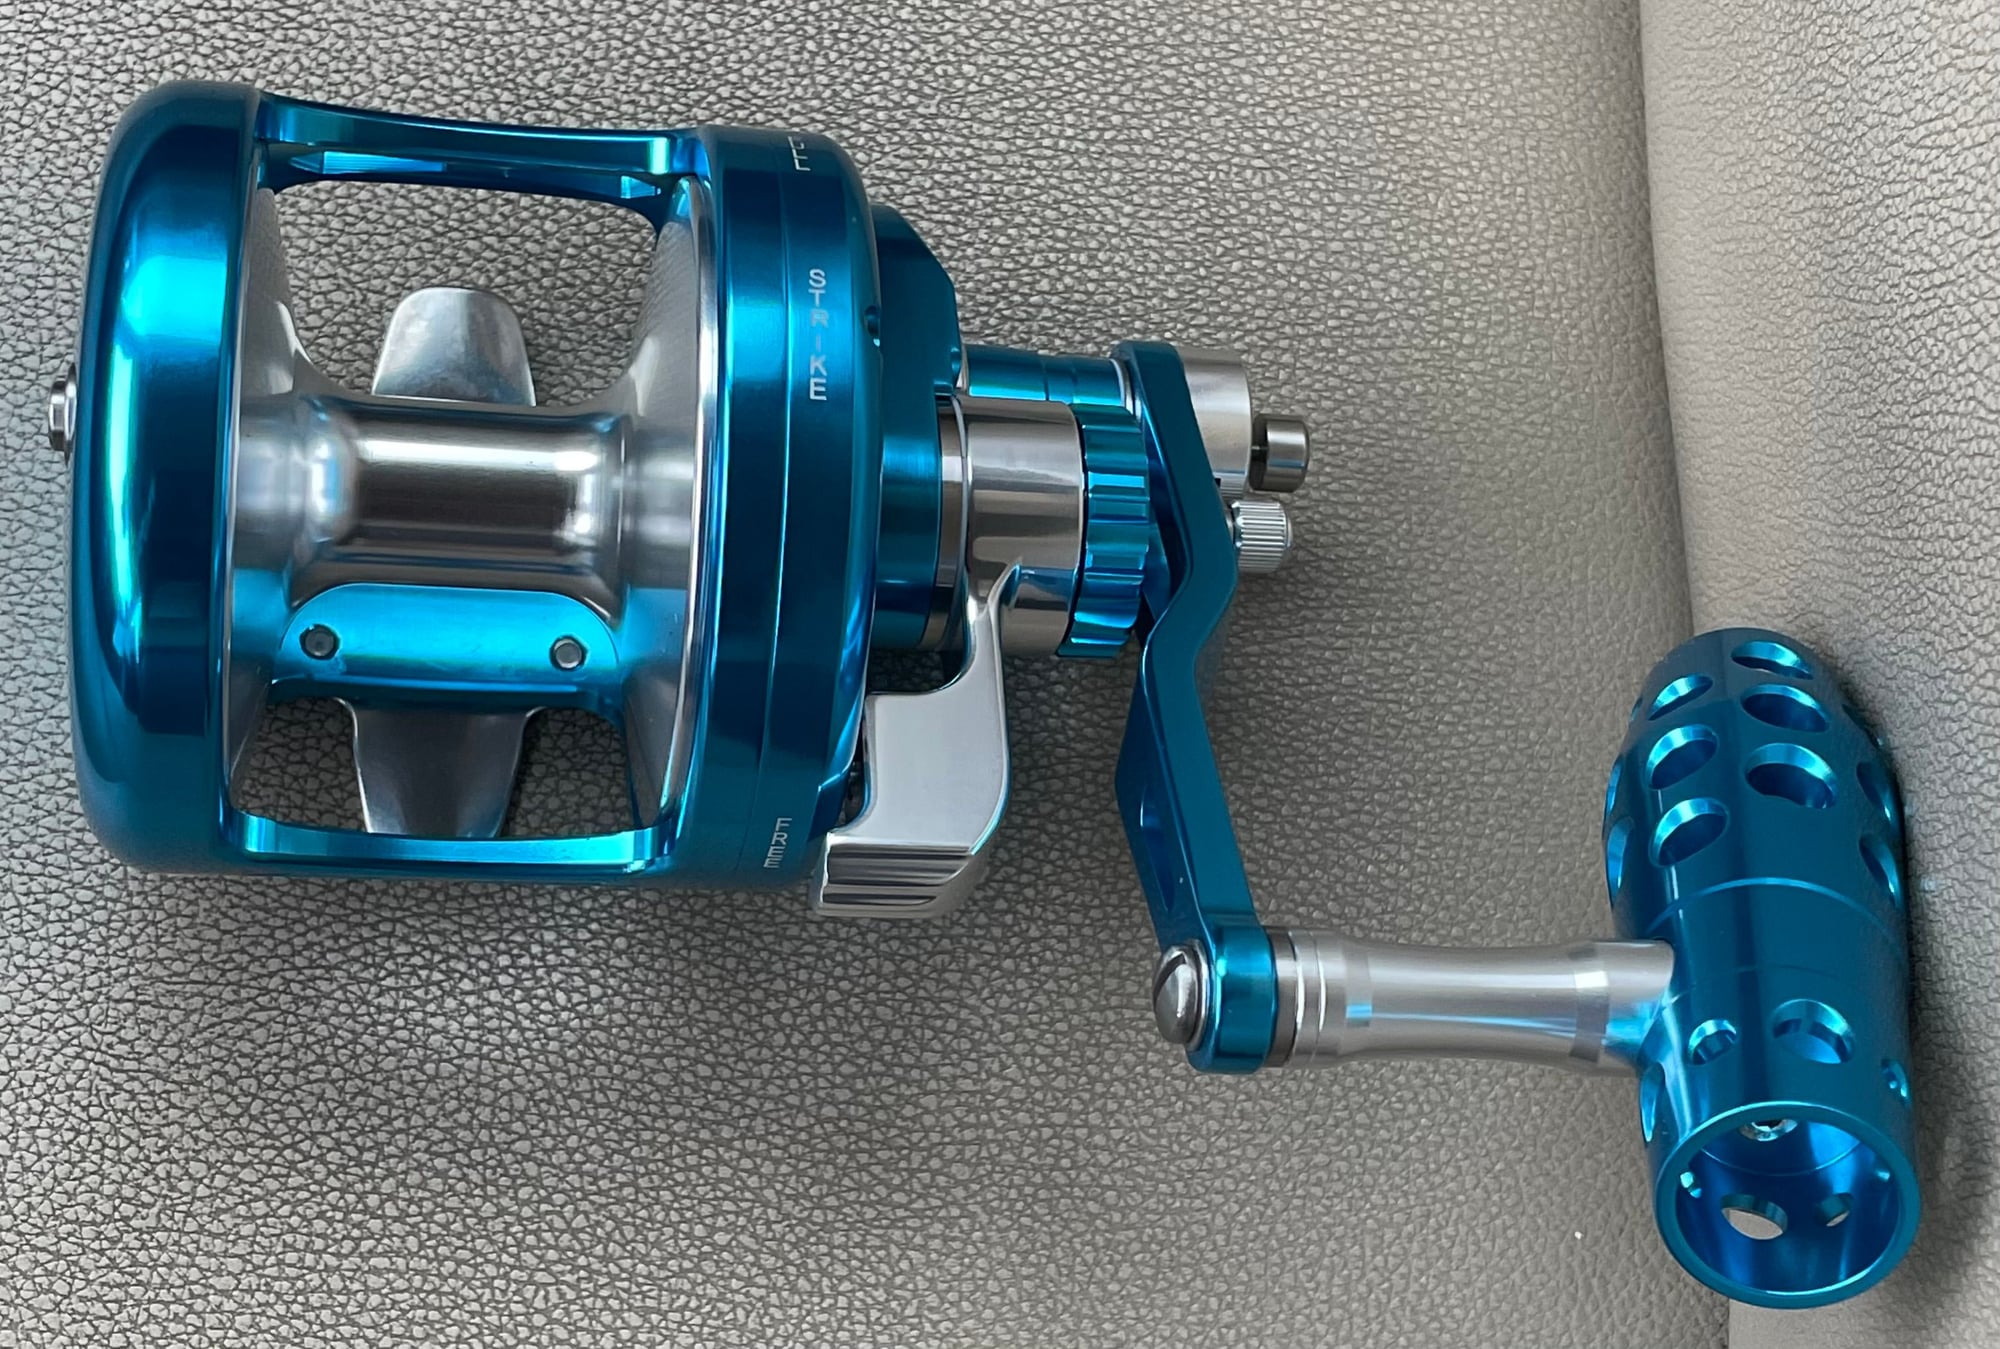 Maxel Sealion Two speed and Maxel Rage Reels - The Hull Truth - Boating and  Fishing Forum